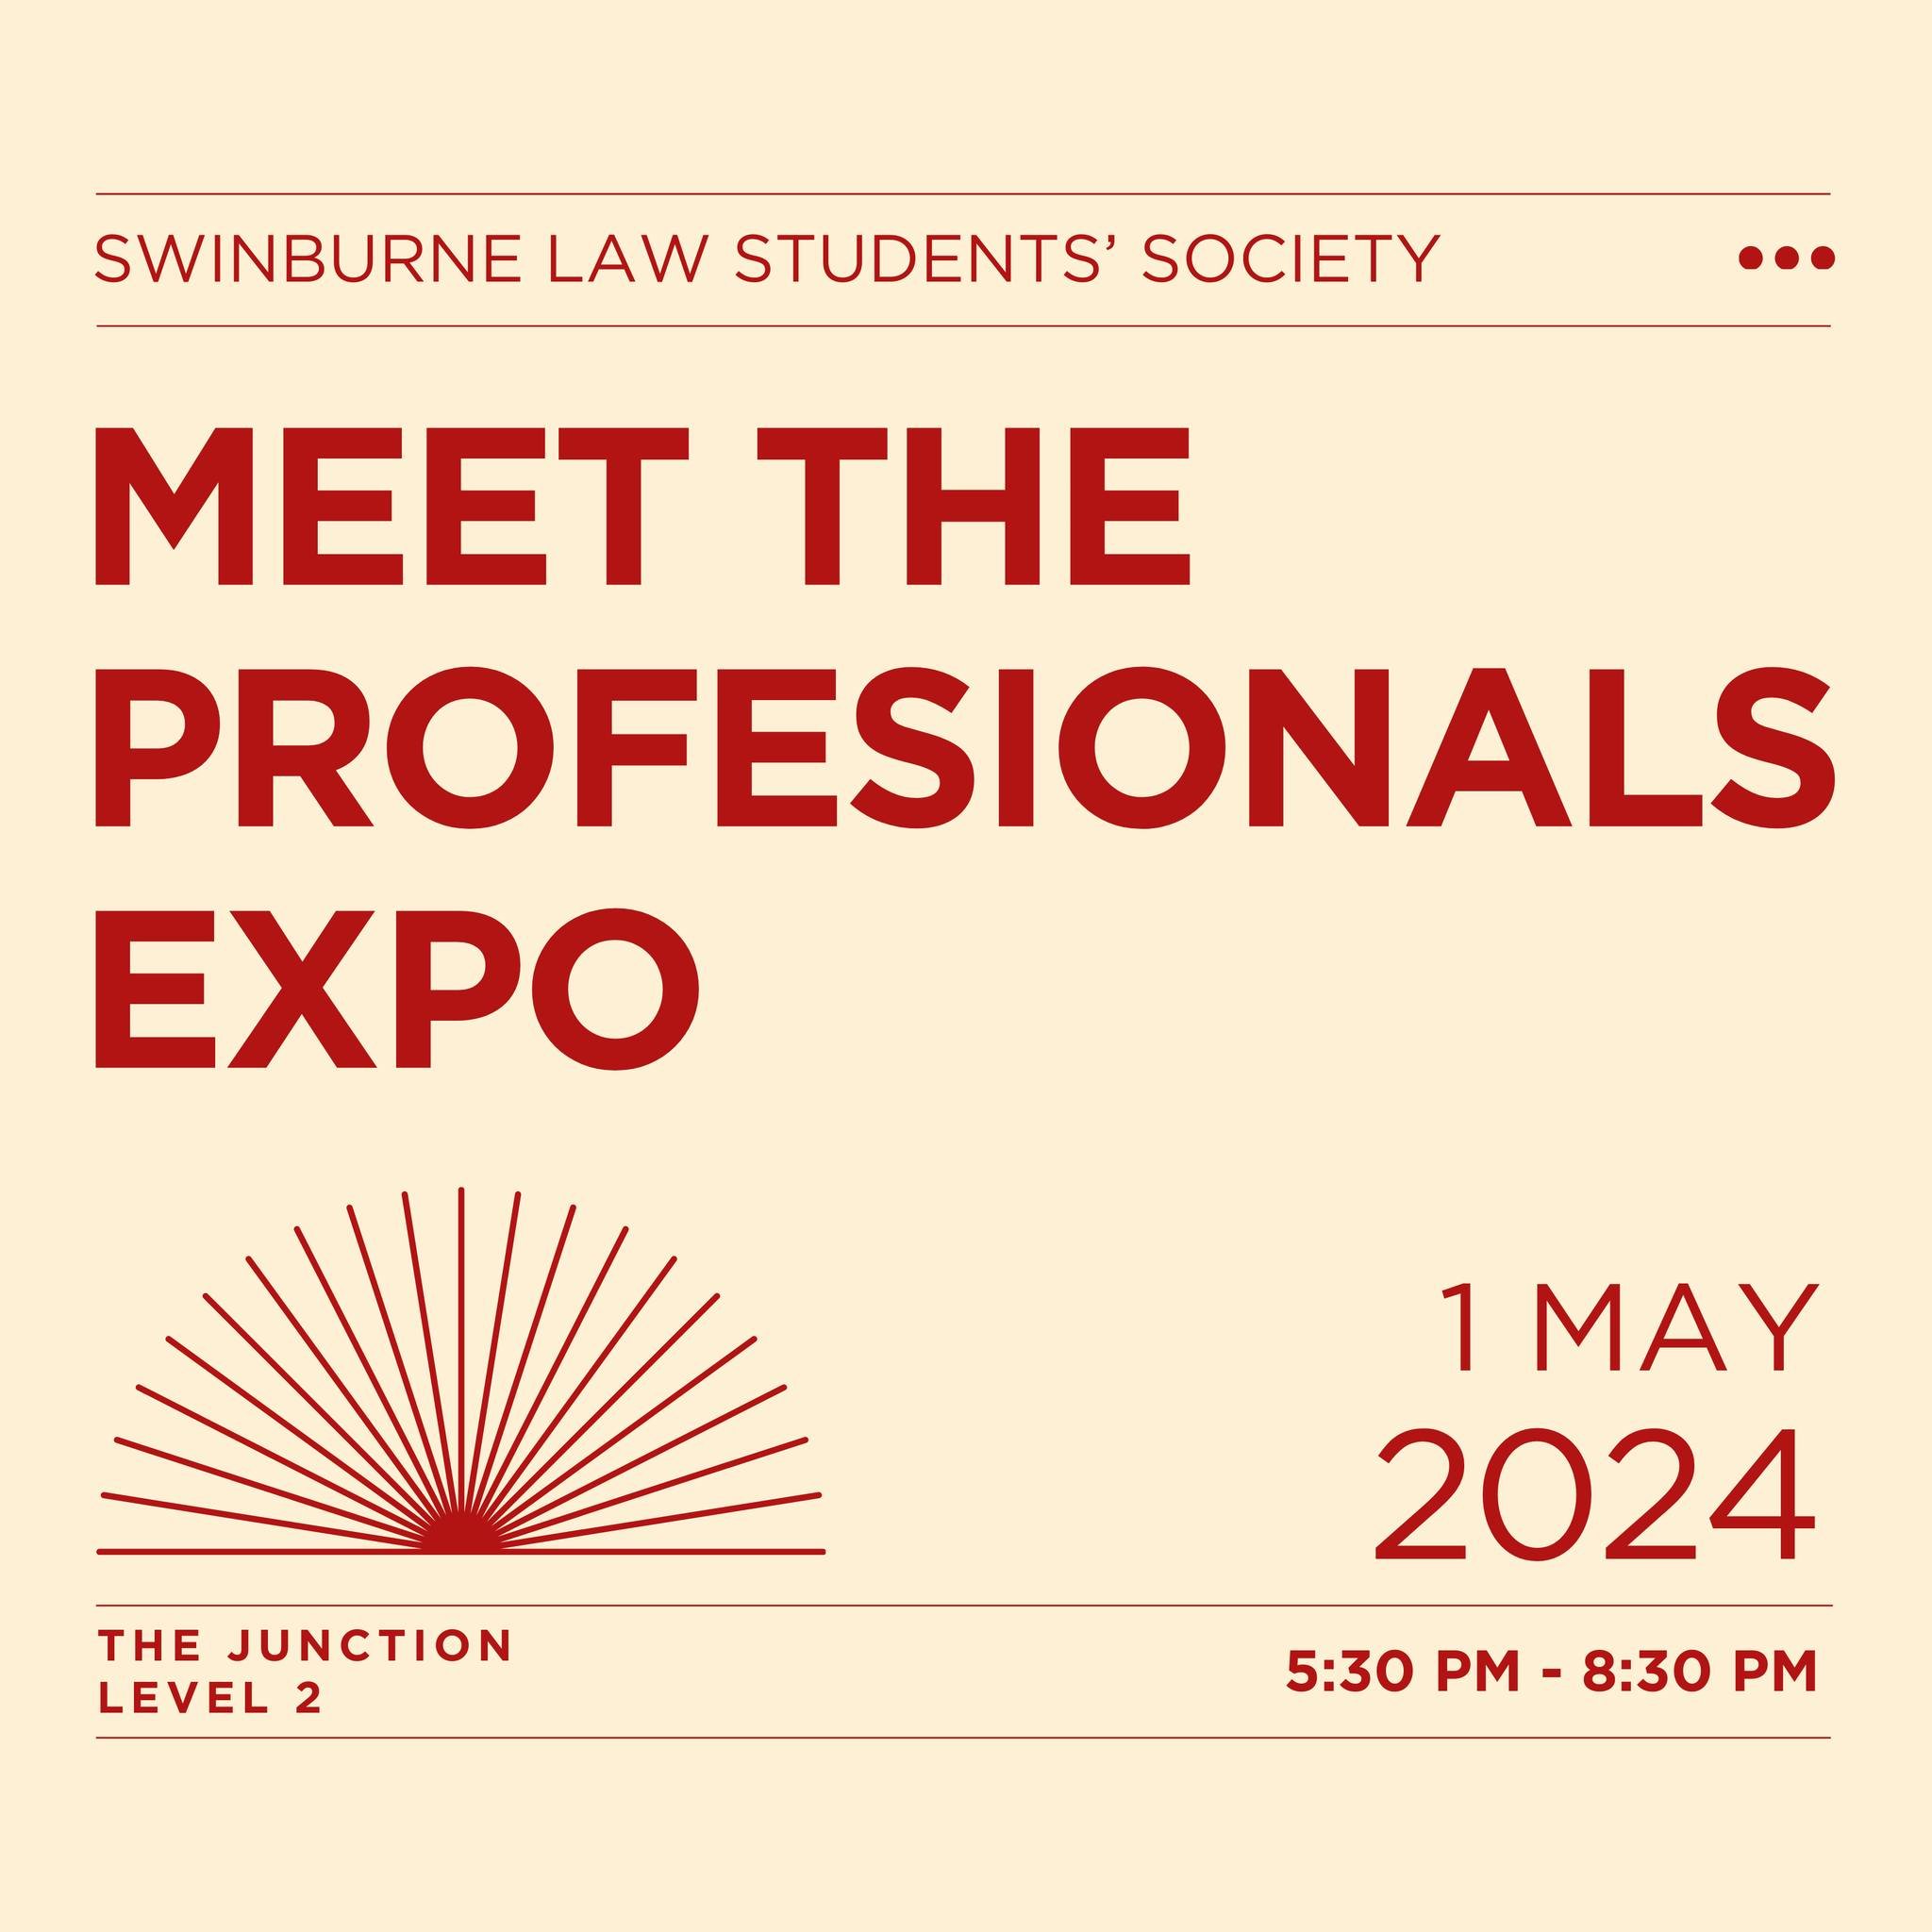 ‼️ONLY 1 WEEK UNTIL THE SLSS MEET THE PROFESSIONALS EXPO‼️

REGISTER NOW for a night of networking with industry professionals from over 15 organisations, FREE catering and FREE professional headshots. 📸

It's an event you really don't want to miss.